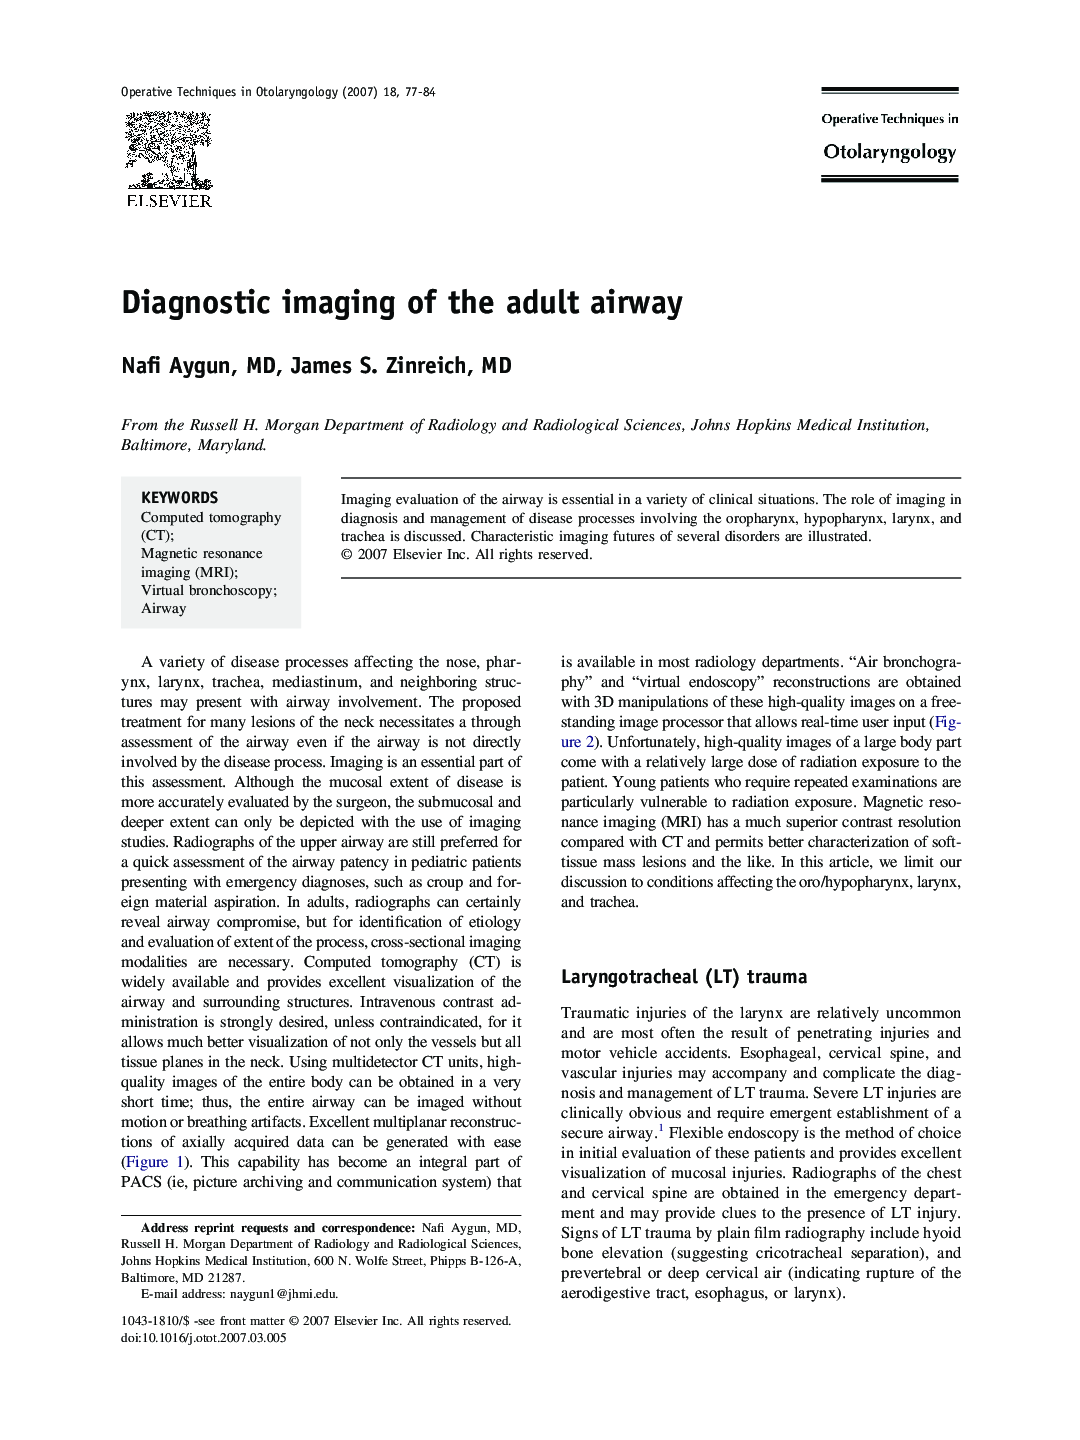 Diagnostic imaging of the adult airway